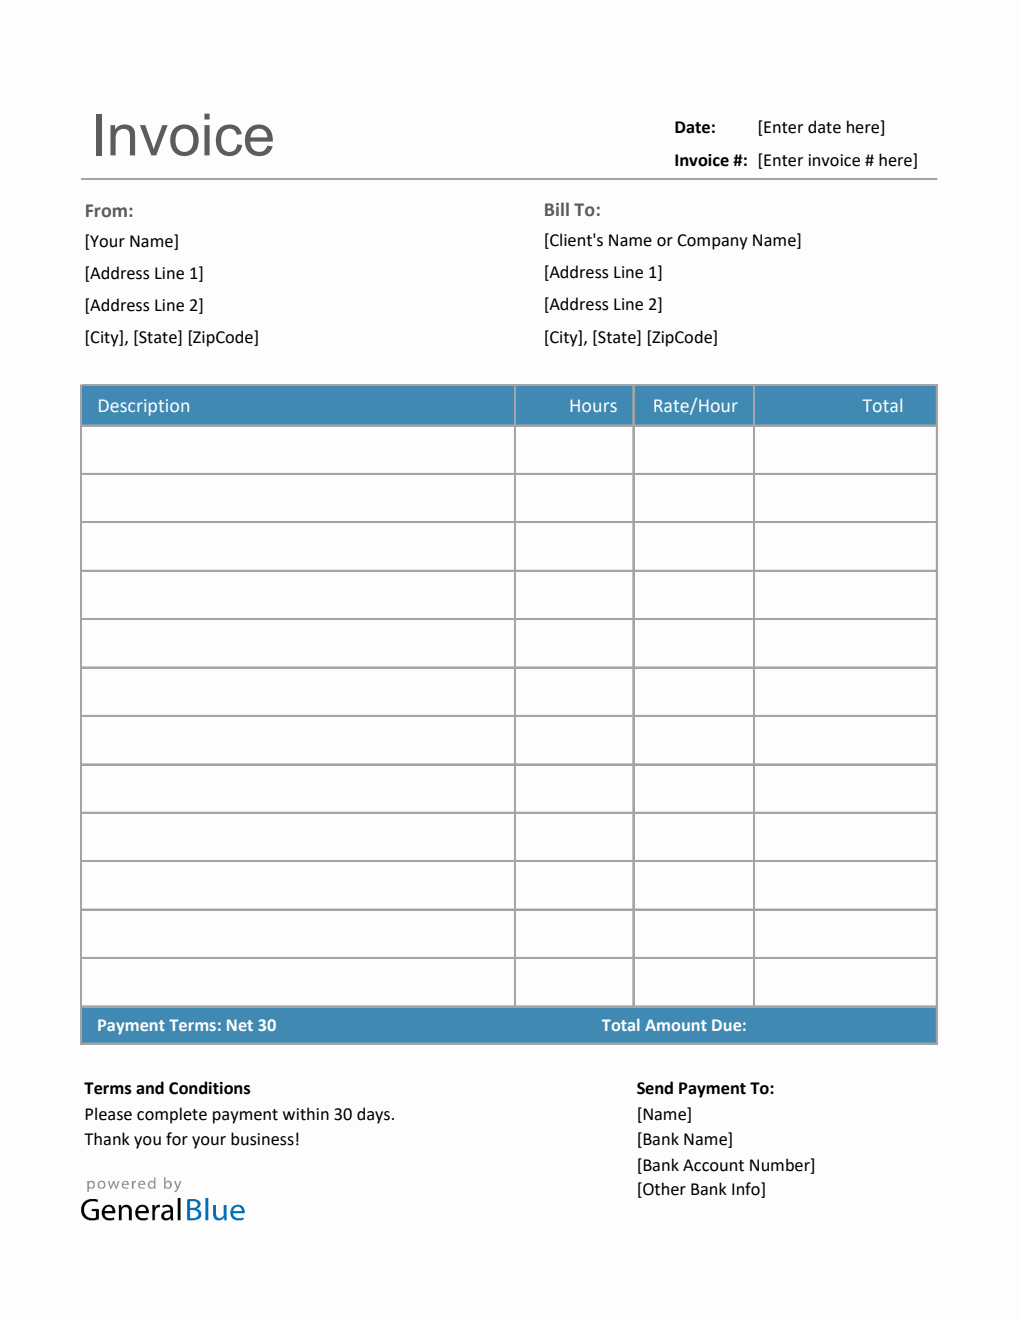 Invoice Template for U.S. Freelancers in Excel (Blue) Regarding Invoice Template For Work Done